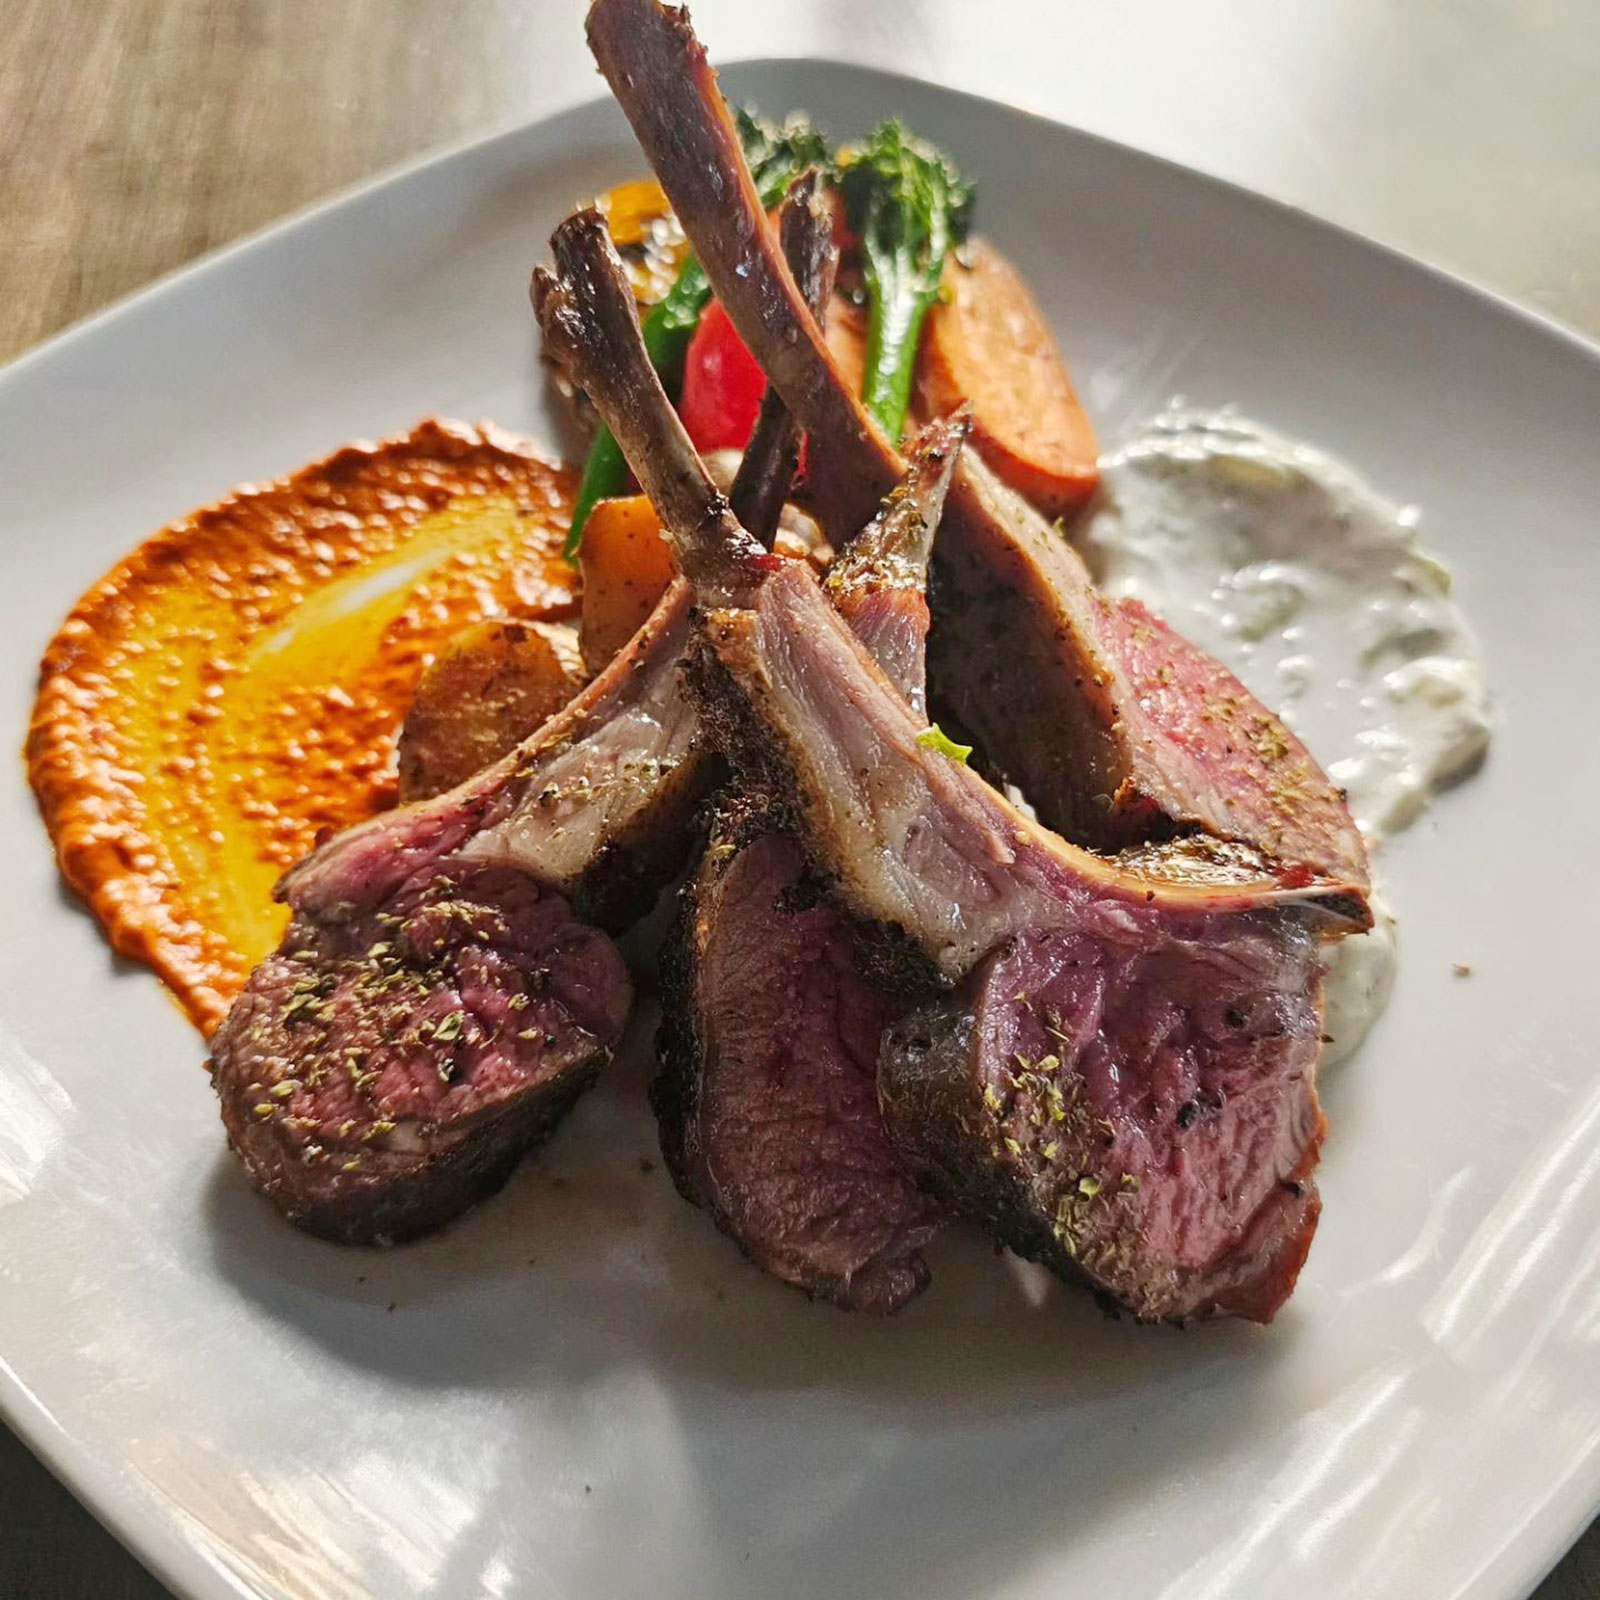 Rack of lamb is one of the popular offerings at the Garden Houzz, known for its Mediterranean and Turkish food.